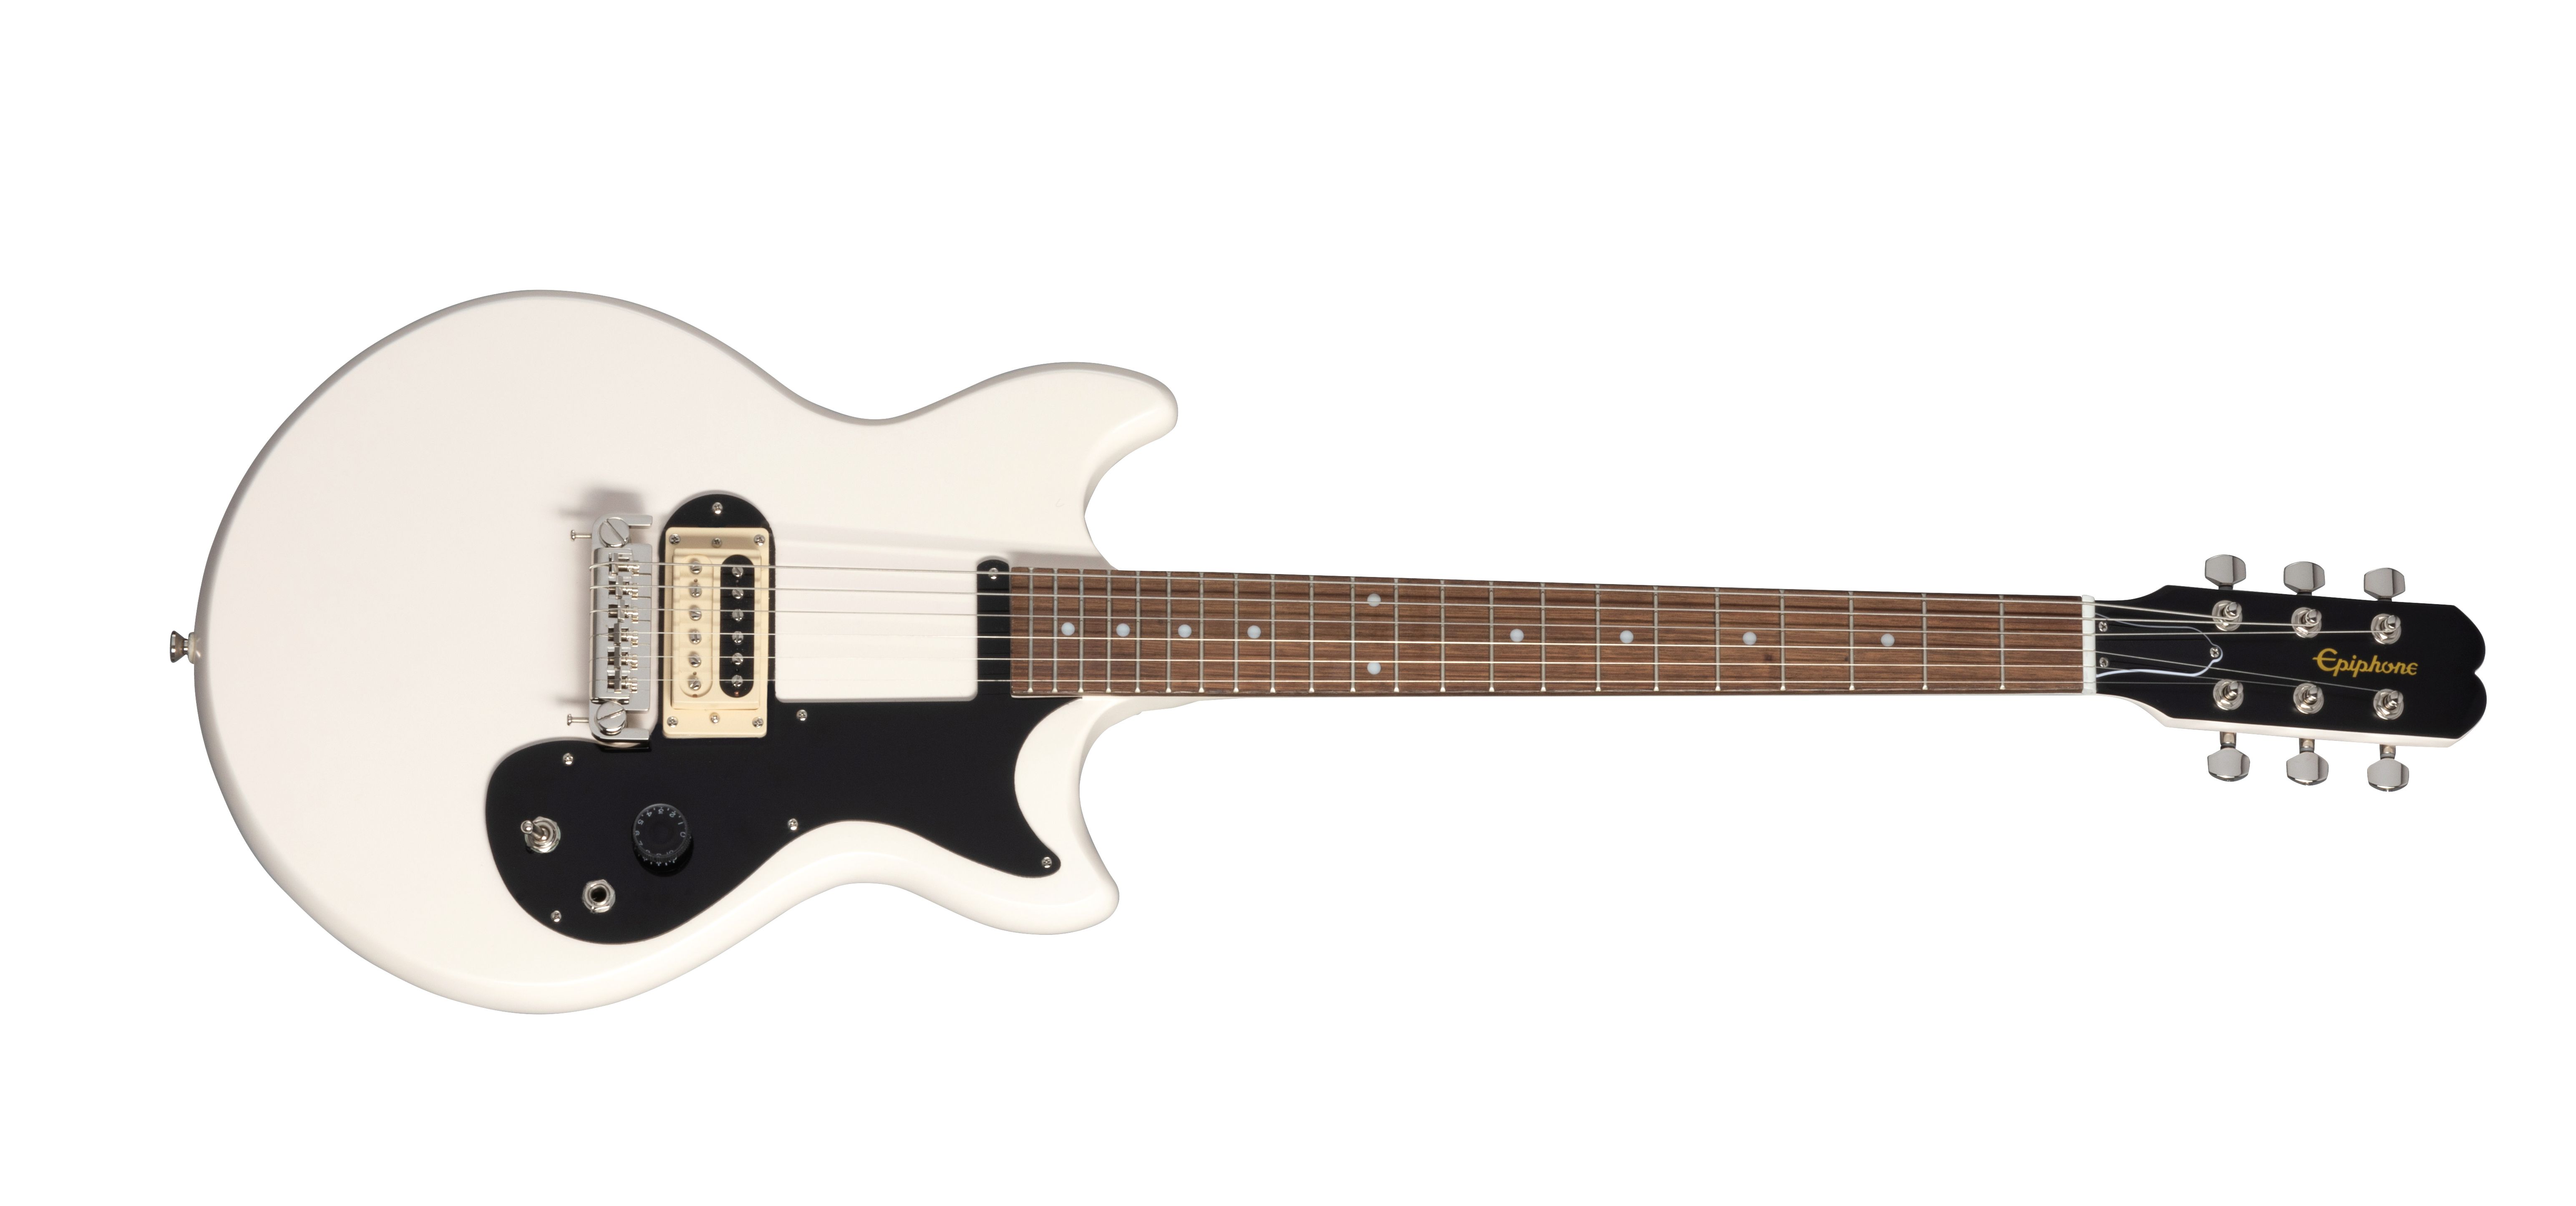 Chitare electrice - Chitara electrica Epiphone Joan Jett Olympic Special Aged Classic White, guitarshop.ro